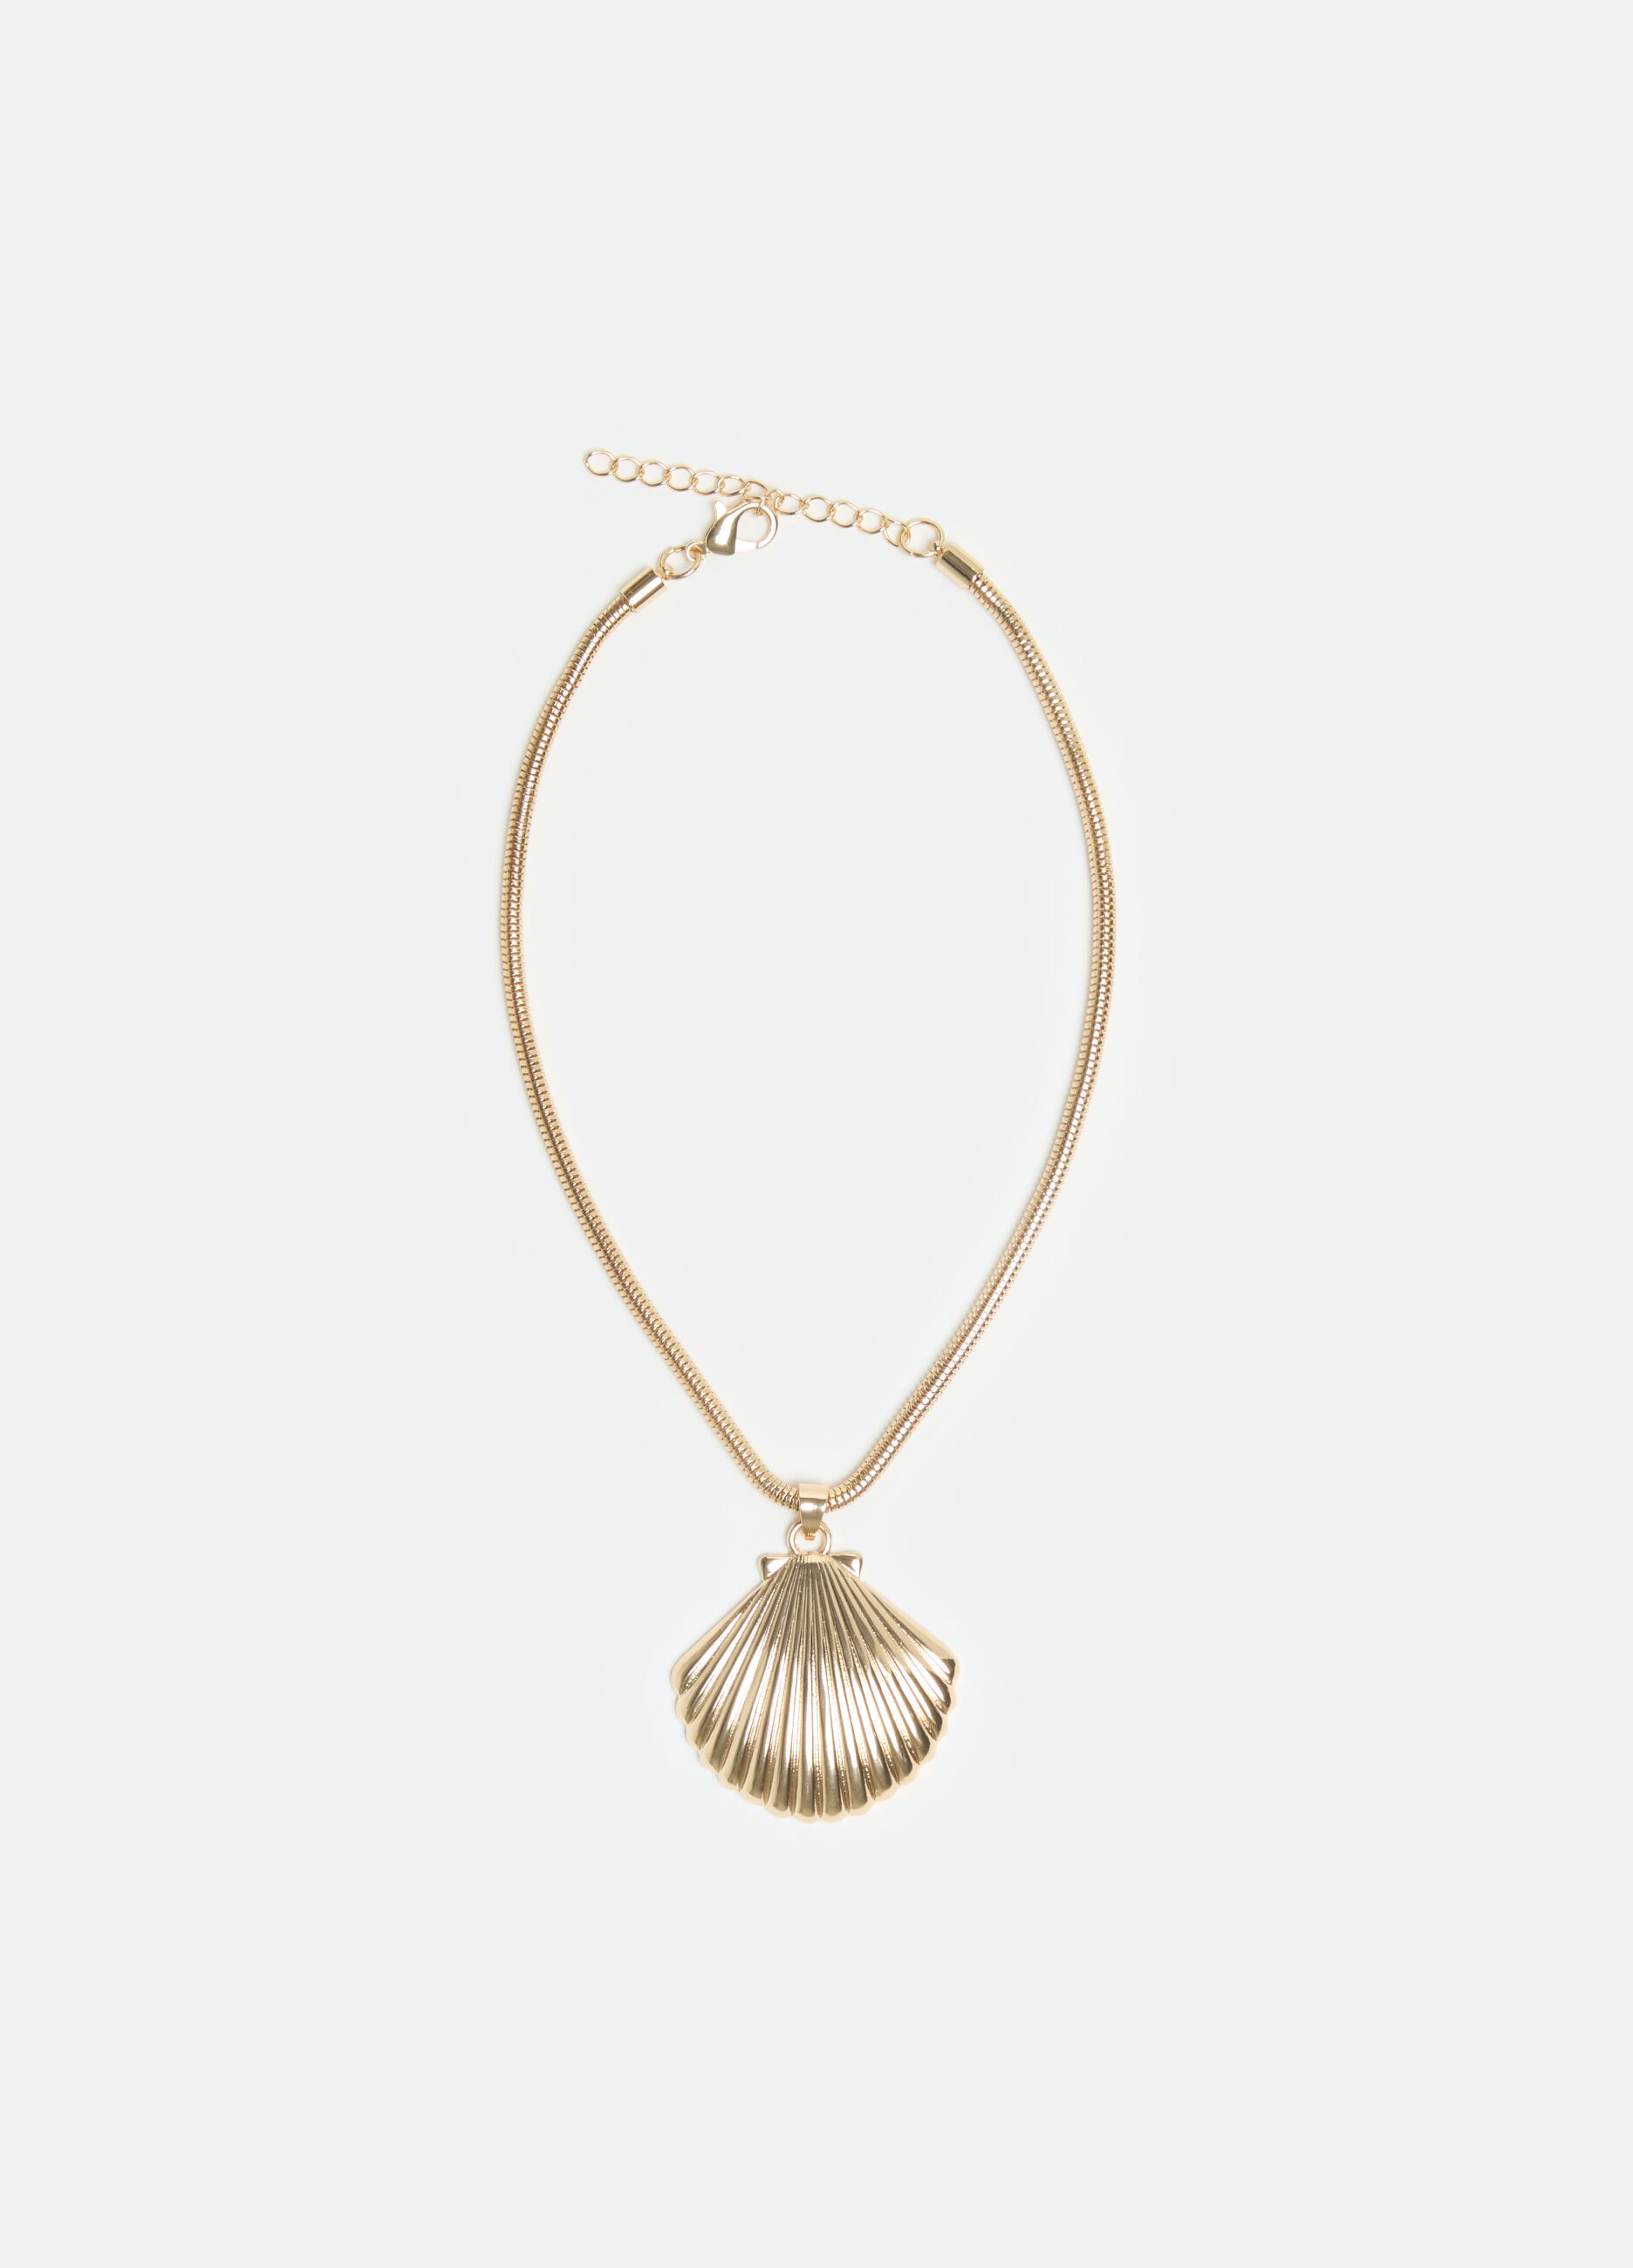 Necklace with shell pendant